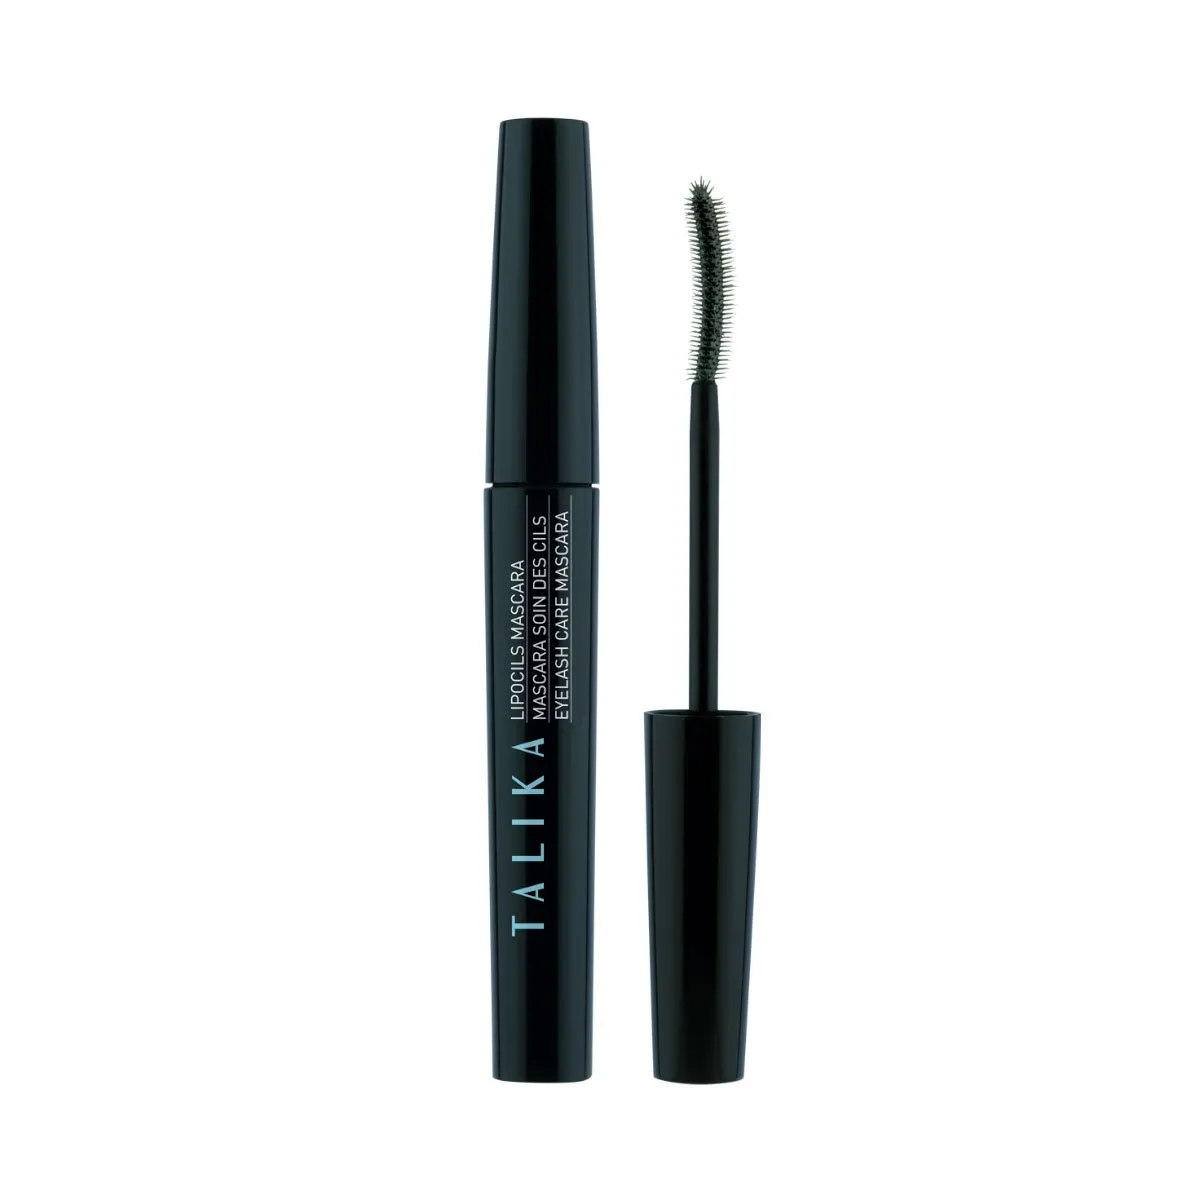 Lipocils Mascara by Talika, the best French mascara overall.